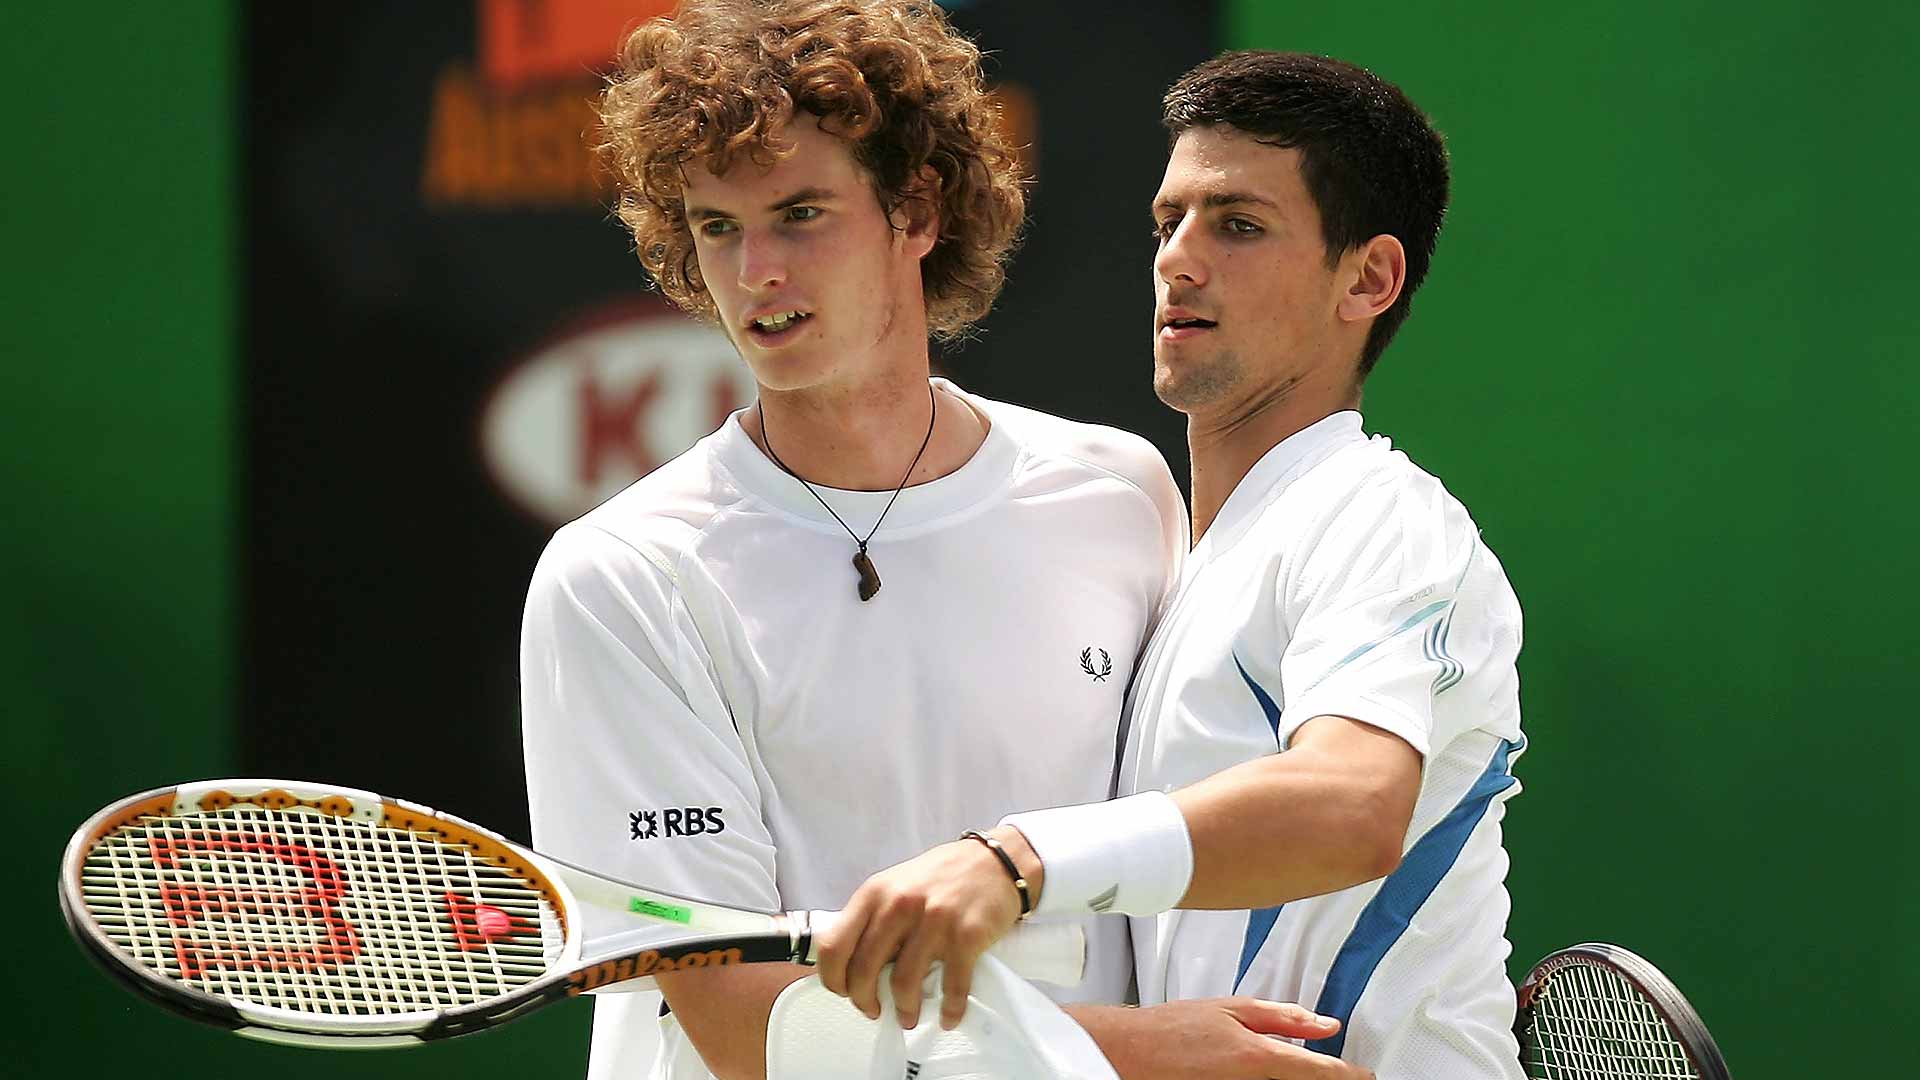 Andy Murray and Novak Djokovic team up at the 2006 Australian Open, just months before their first FedEx ATP Head2Head meeting.